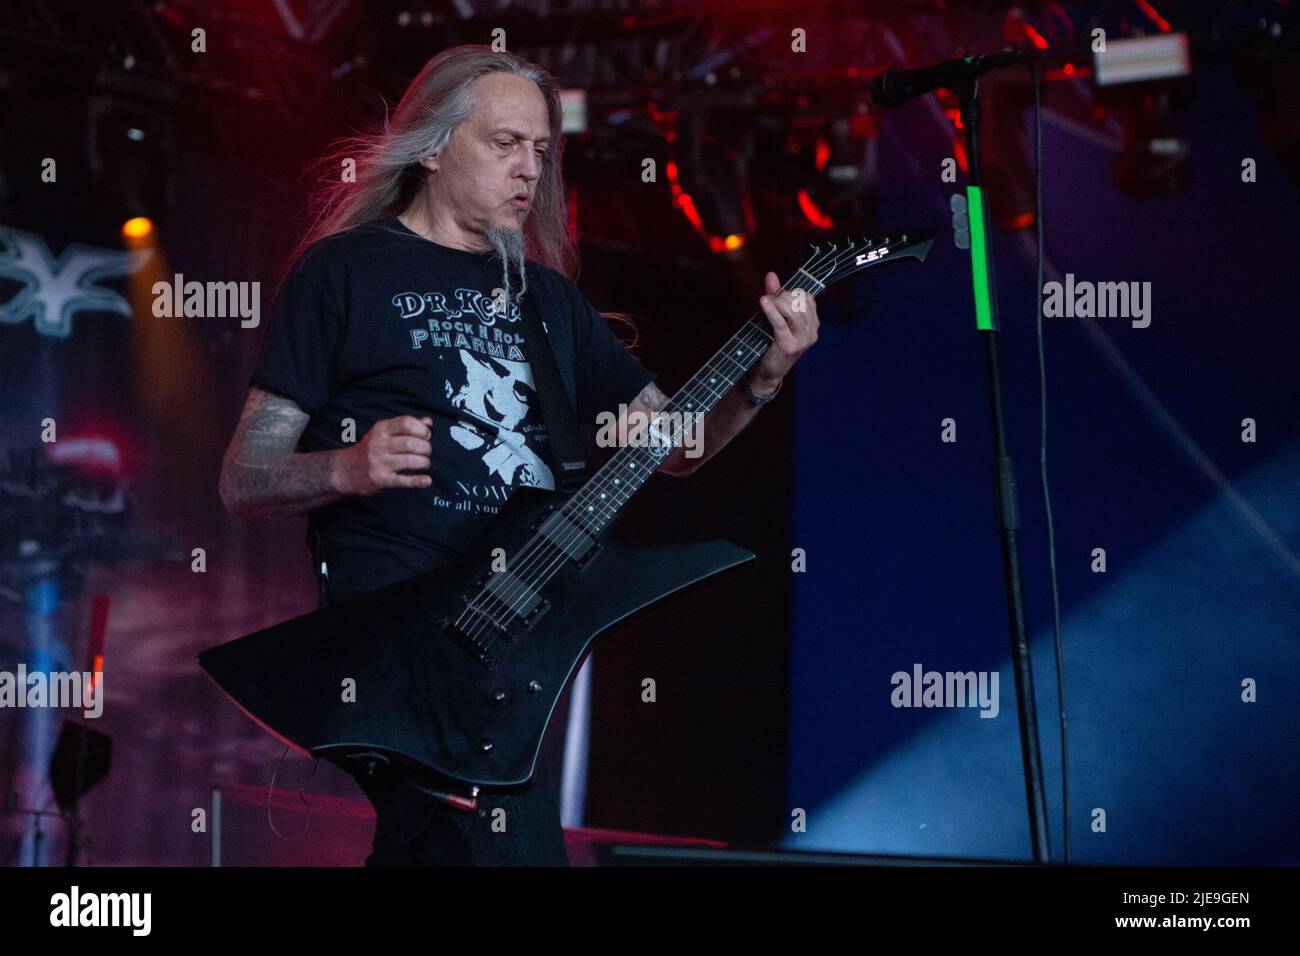 Oslo, Norway. 23rd, June 2022. The Swedish death metal band Hypocrisy performs a live concert during the Norwegian music festival Tons of Rock 2022 in Oslo. Here vocalist Peter Tagtgren is seen live on stage. (Photo credit: Gonzales Photo - Per-Otto Oppi). Stock Photo